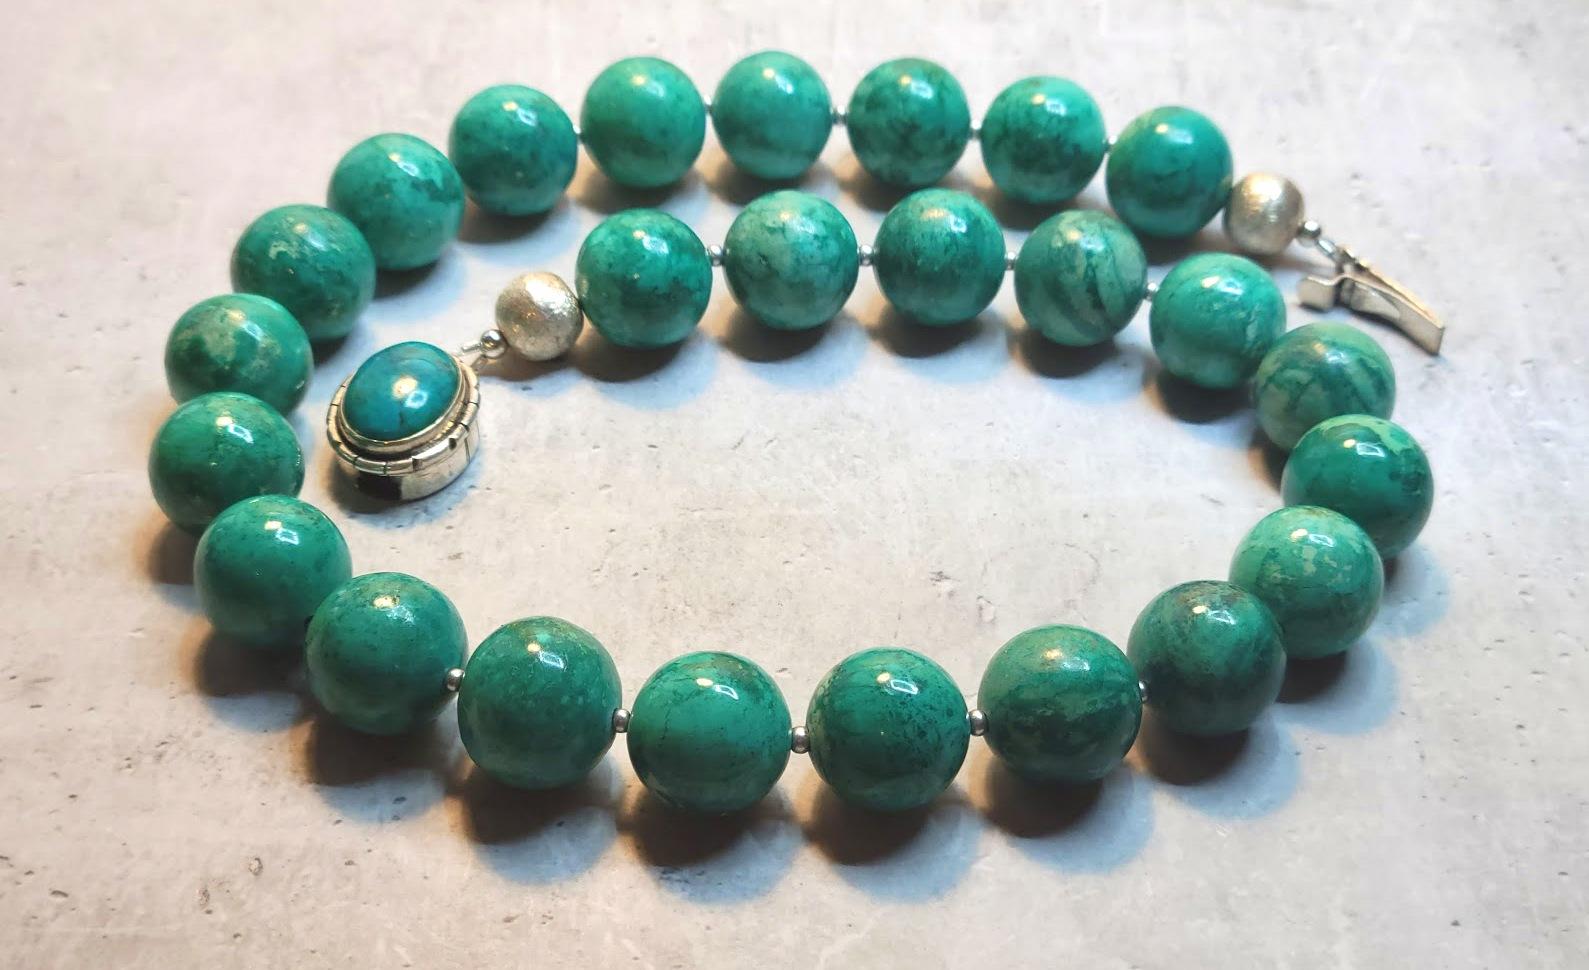 The length of the necklace is 18 inches (45.7 cm). The size of the smooth round beads is 16 mm.
The beads' color is bright and deep. They are a mixture of sea green and aquamarine with an admixture of green, light blue, celadon, and sky